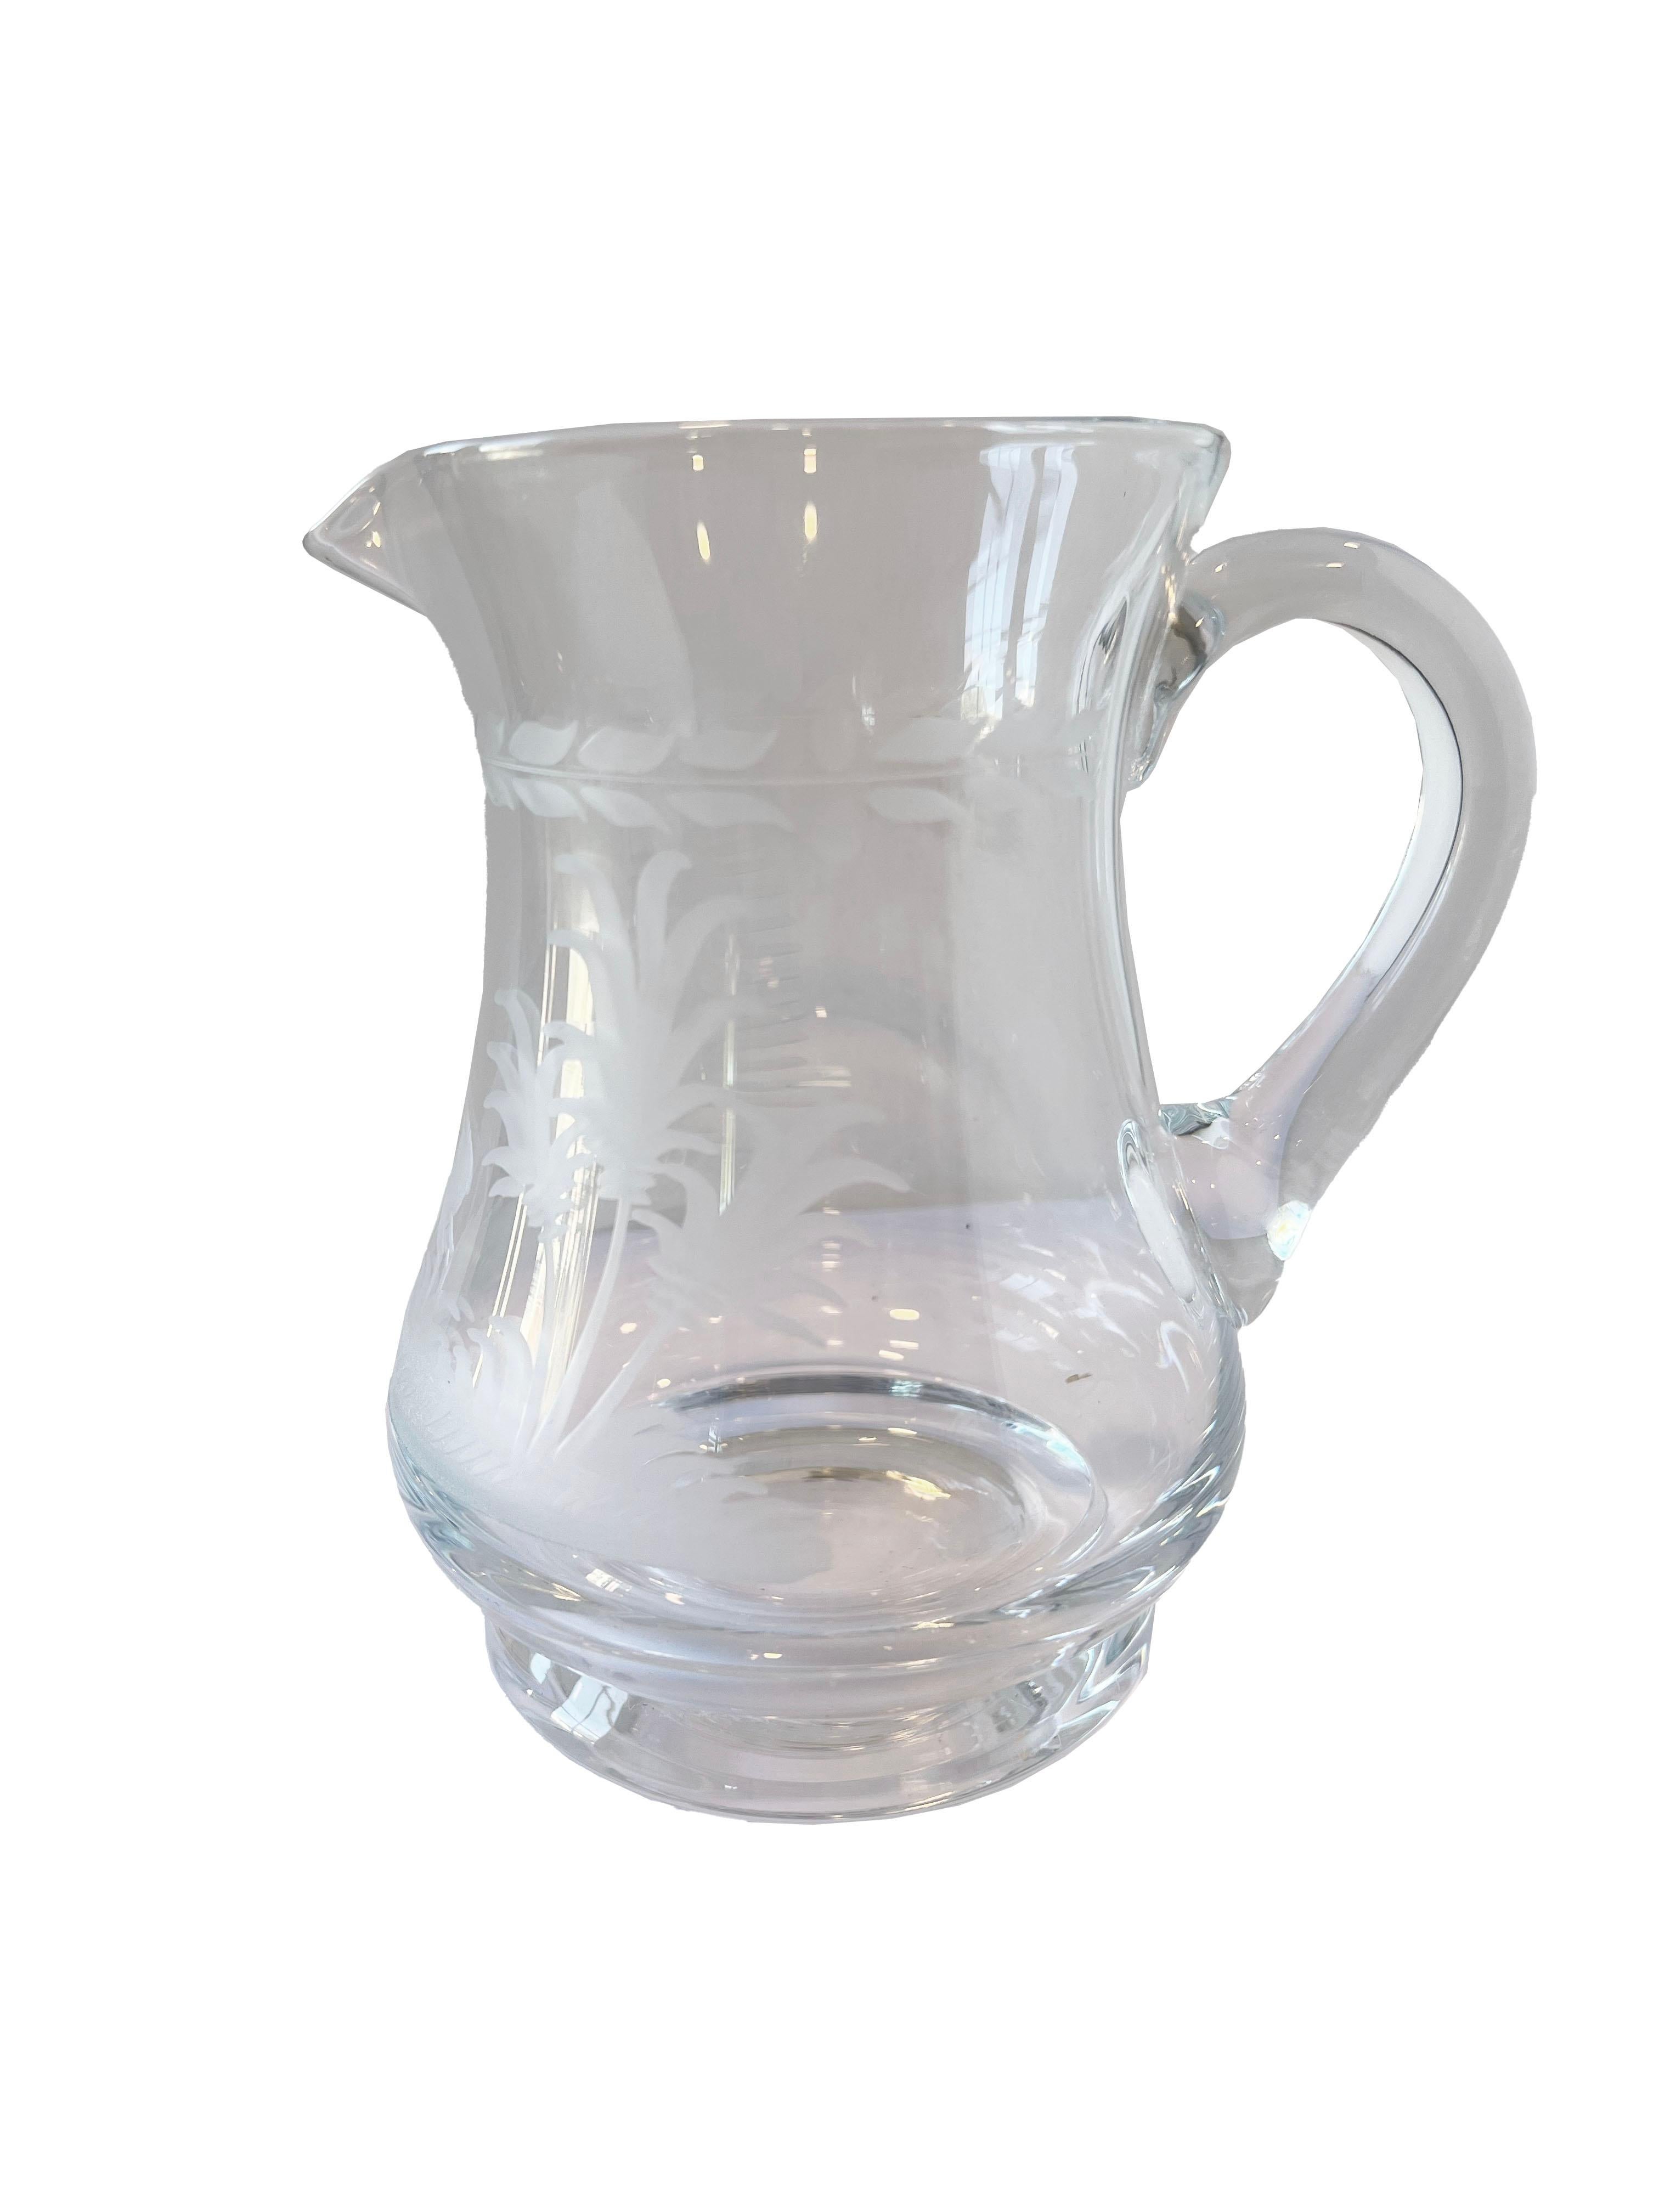 20th Century Set of 3 Glass Etched Pitchers from Andre Leon Talley's Private Collection For Sale